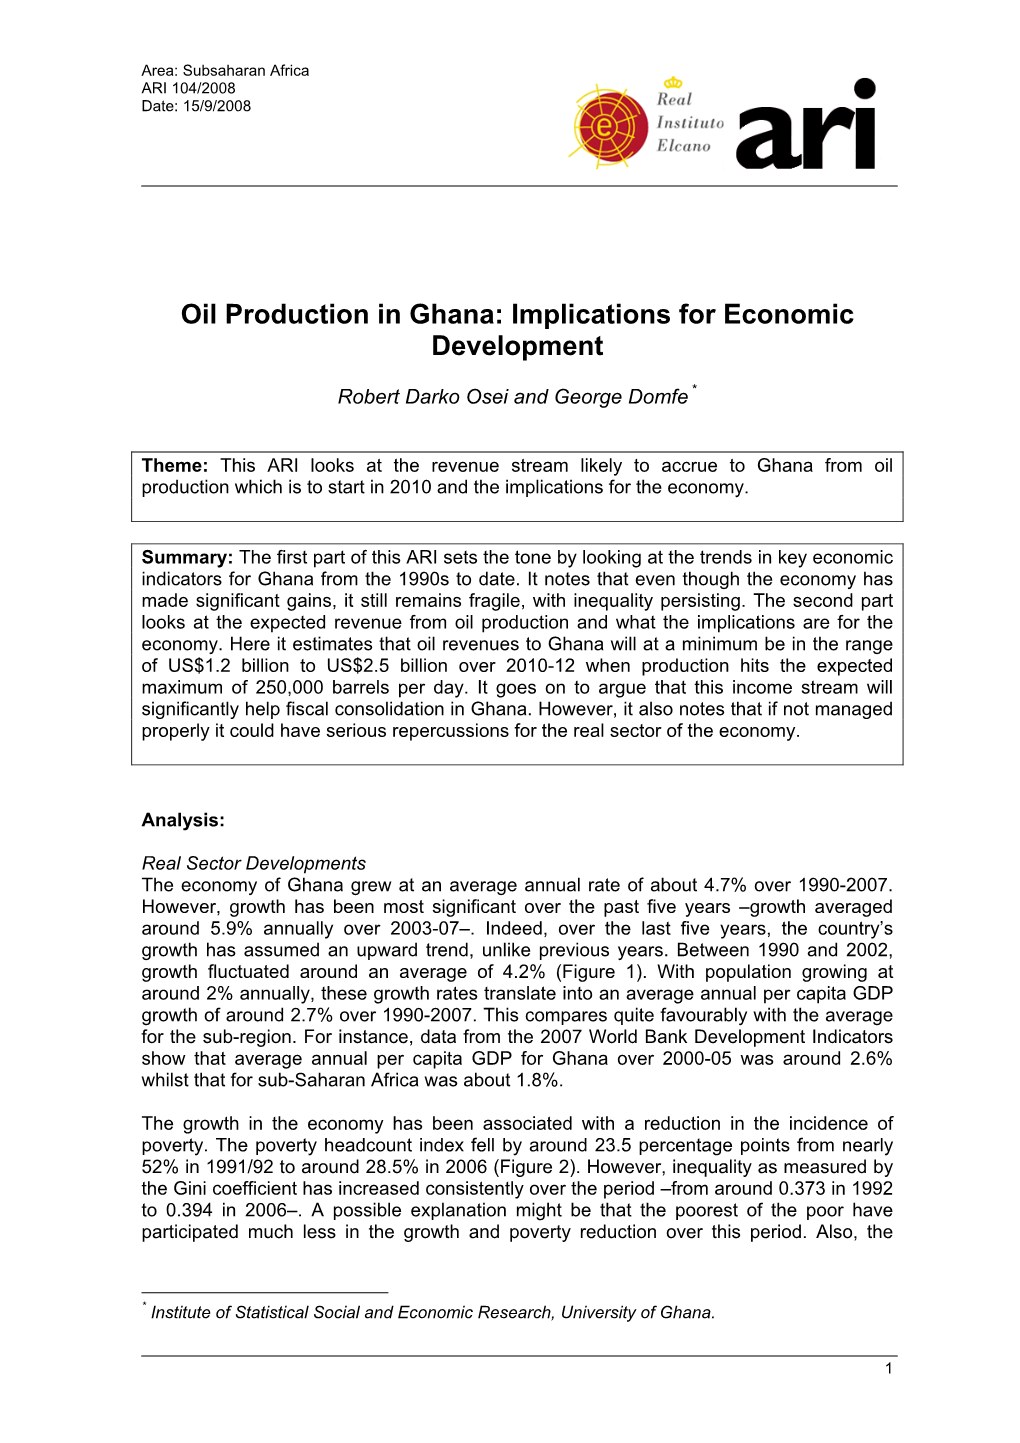 Oil Production in Ghana: Implications for Economic Development